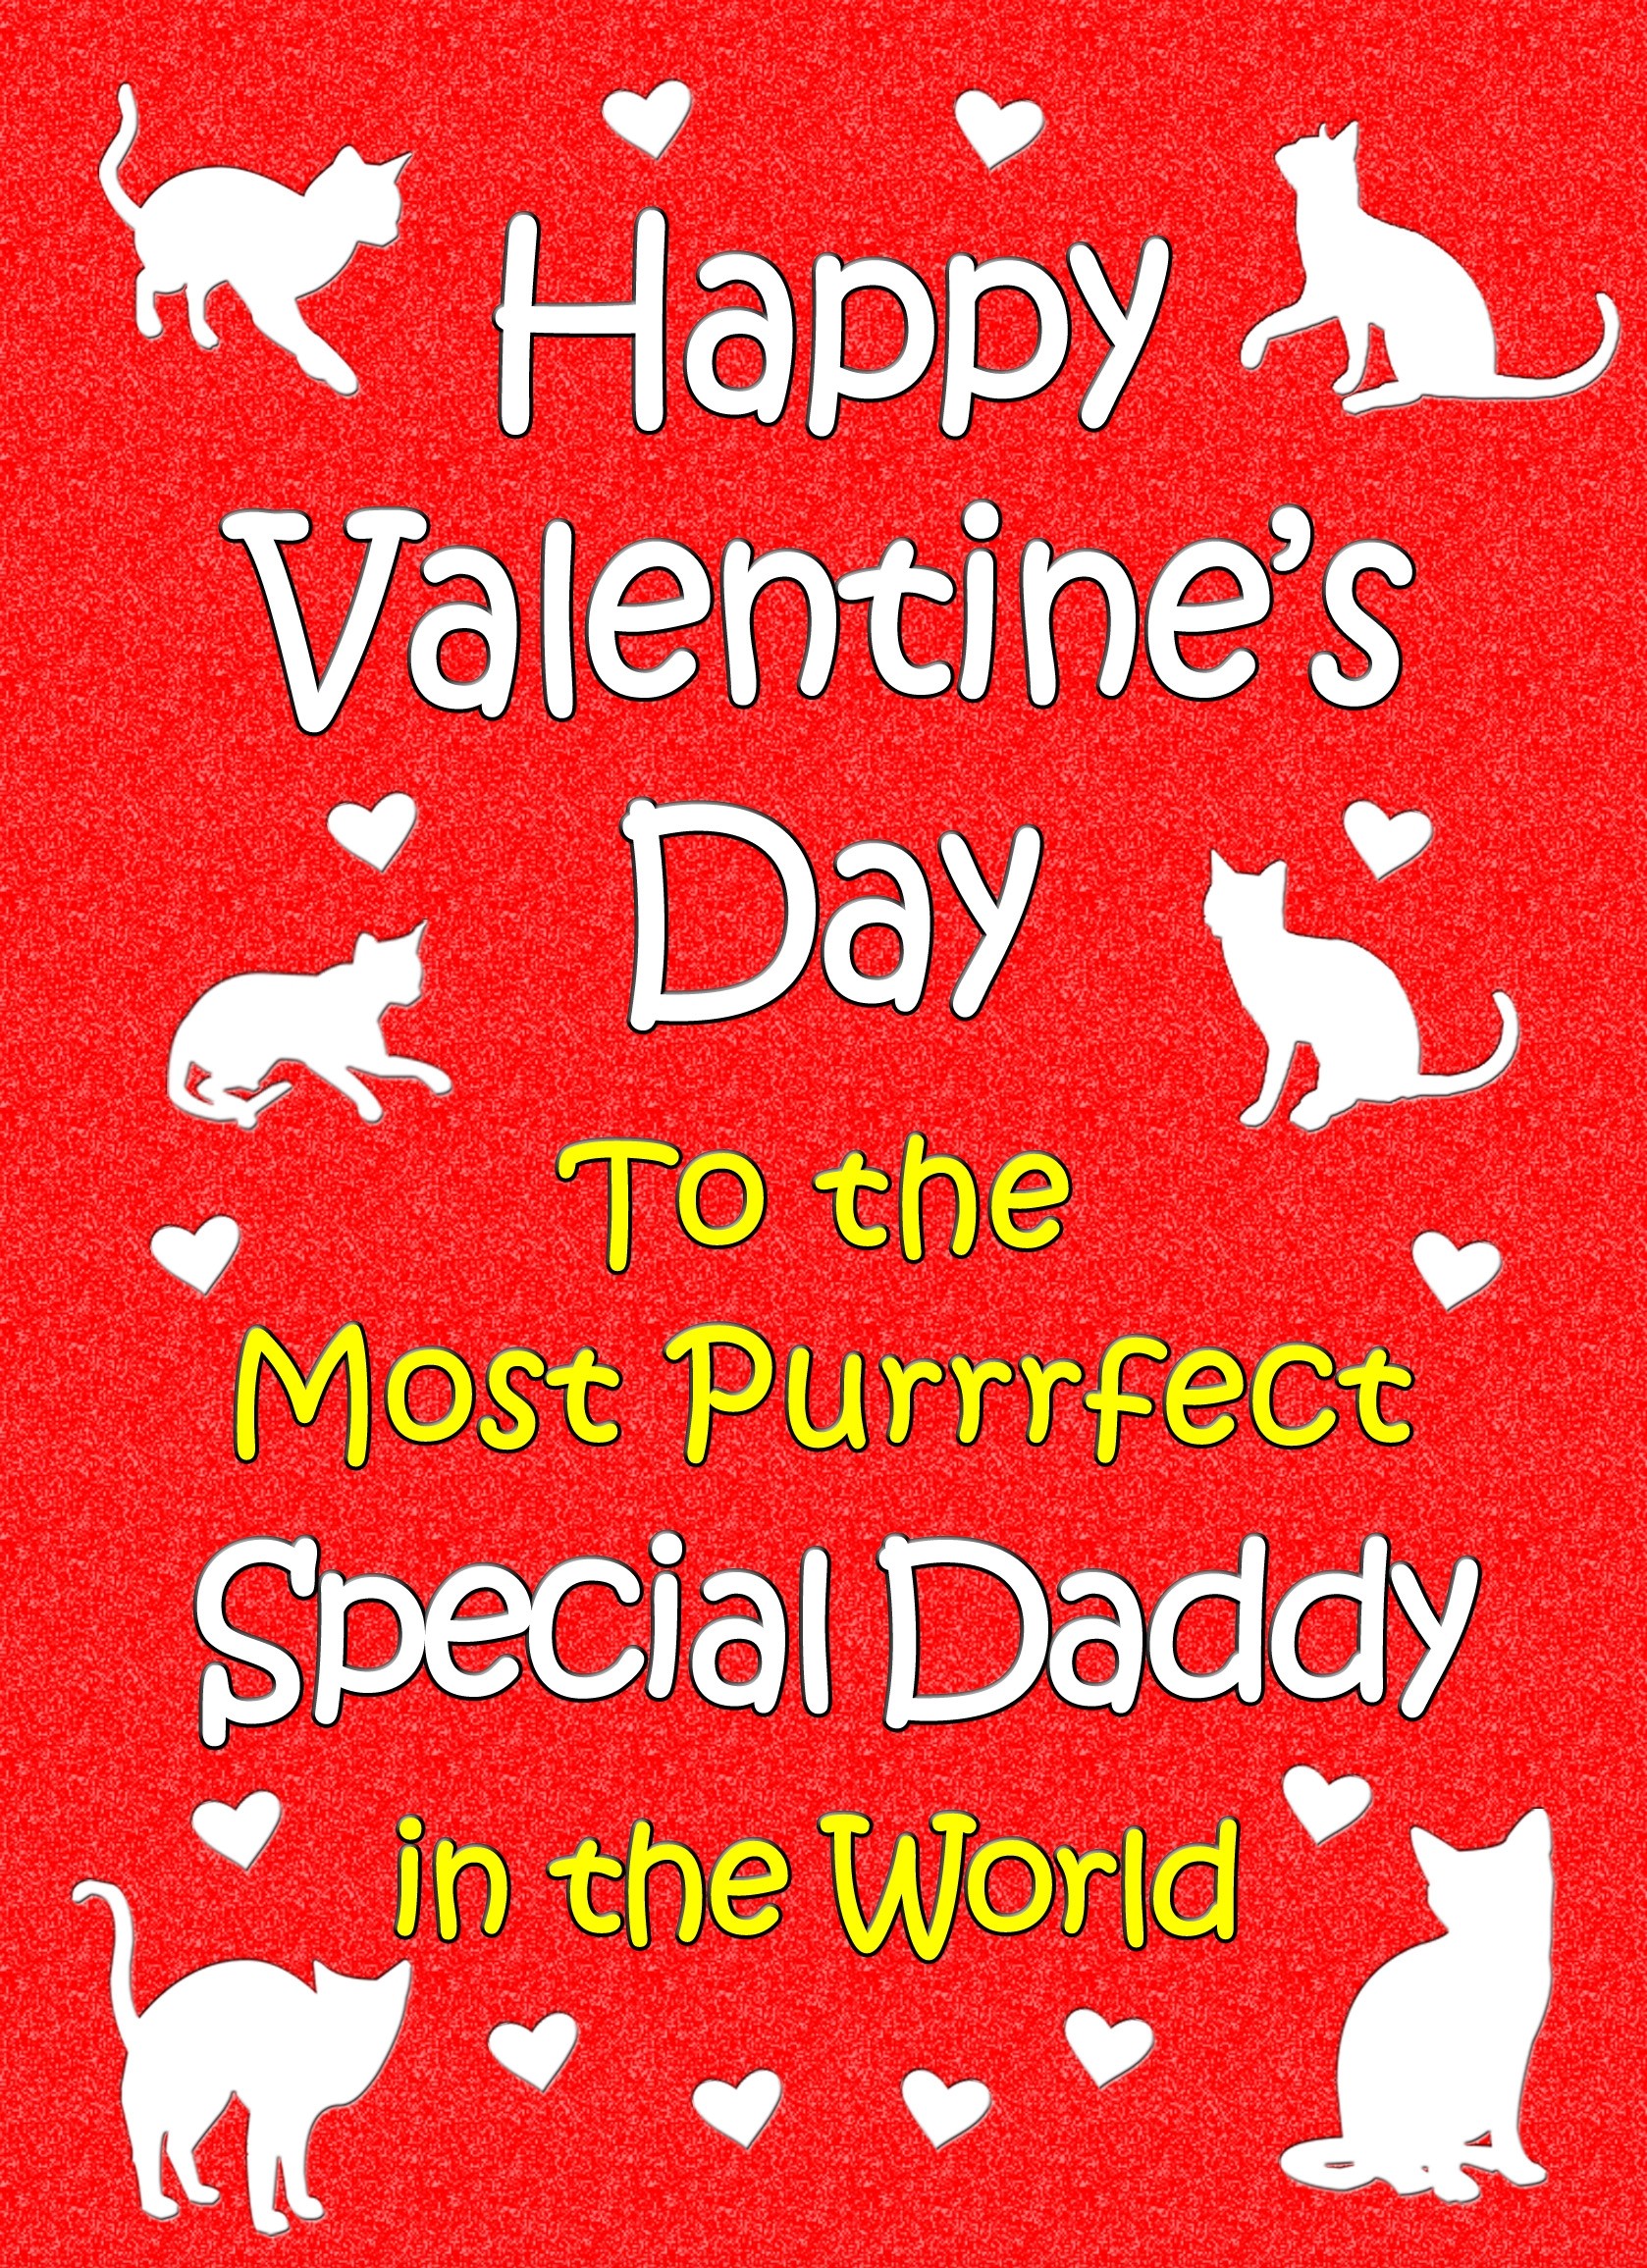 From The Cat Valentines Day Card (Special Daddy)